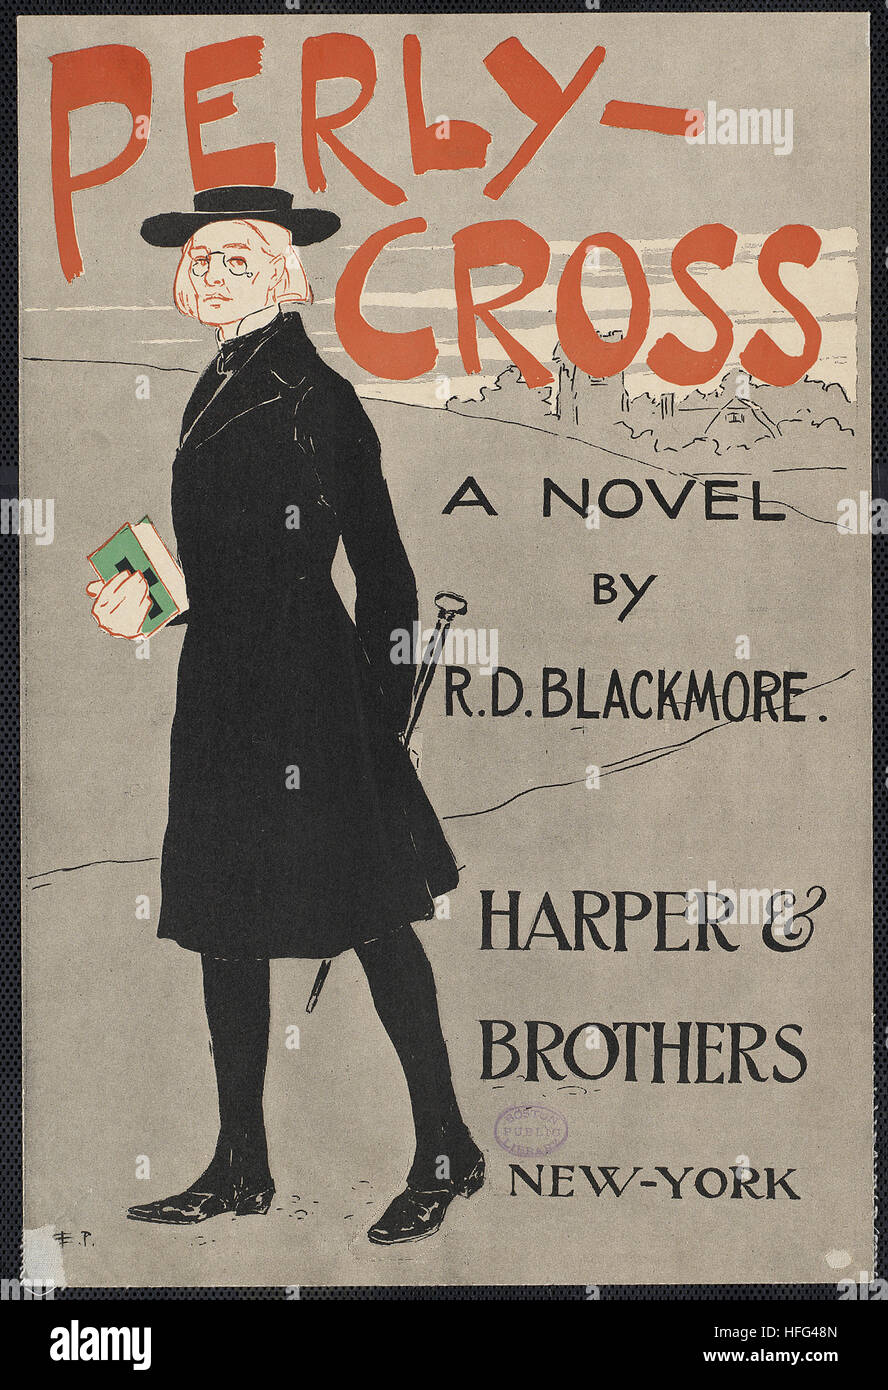 Perly-Cross, a novel by R. D. Blackmore. Stock Photo